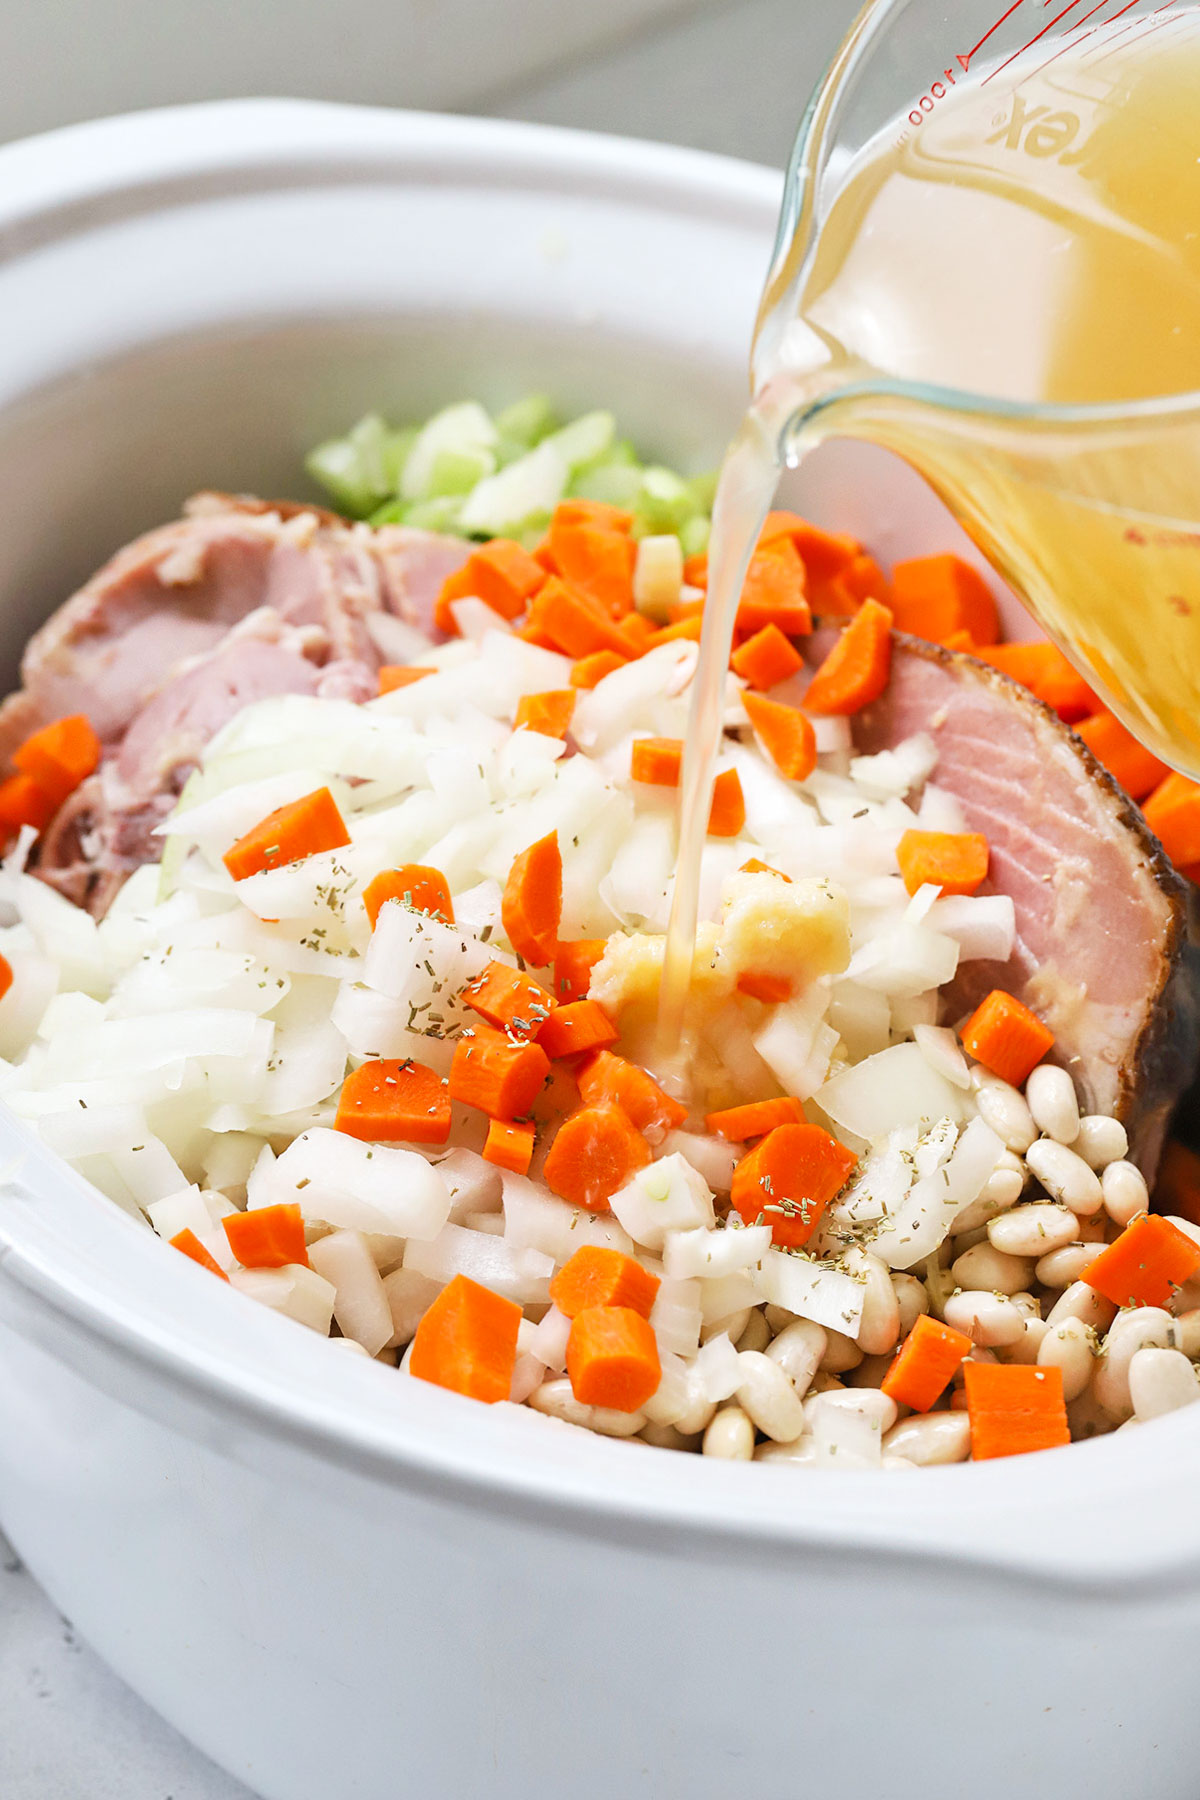 Pouring broth over veggies to make crock pot ham and bean soup